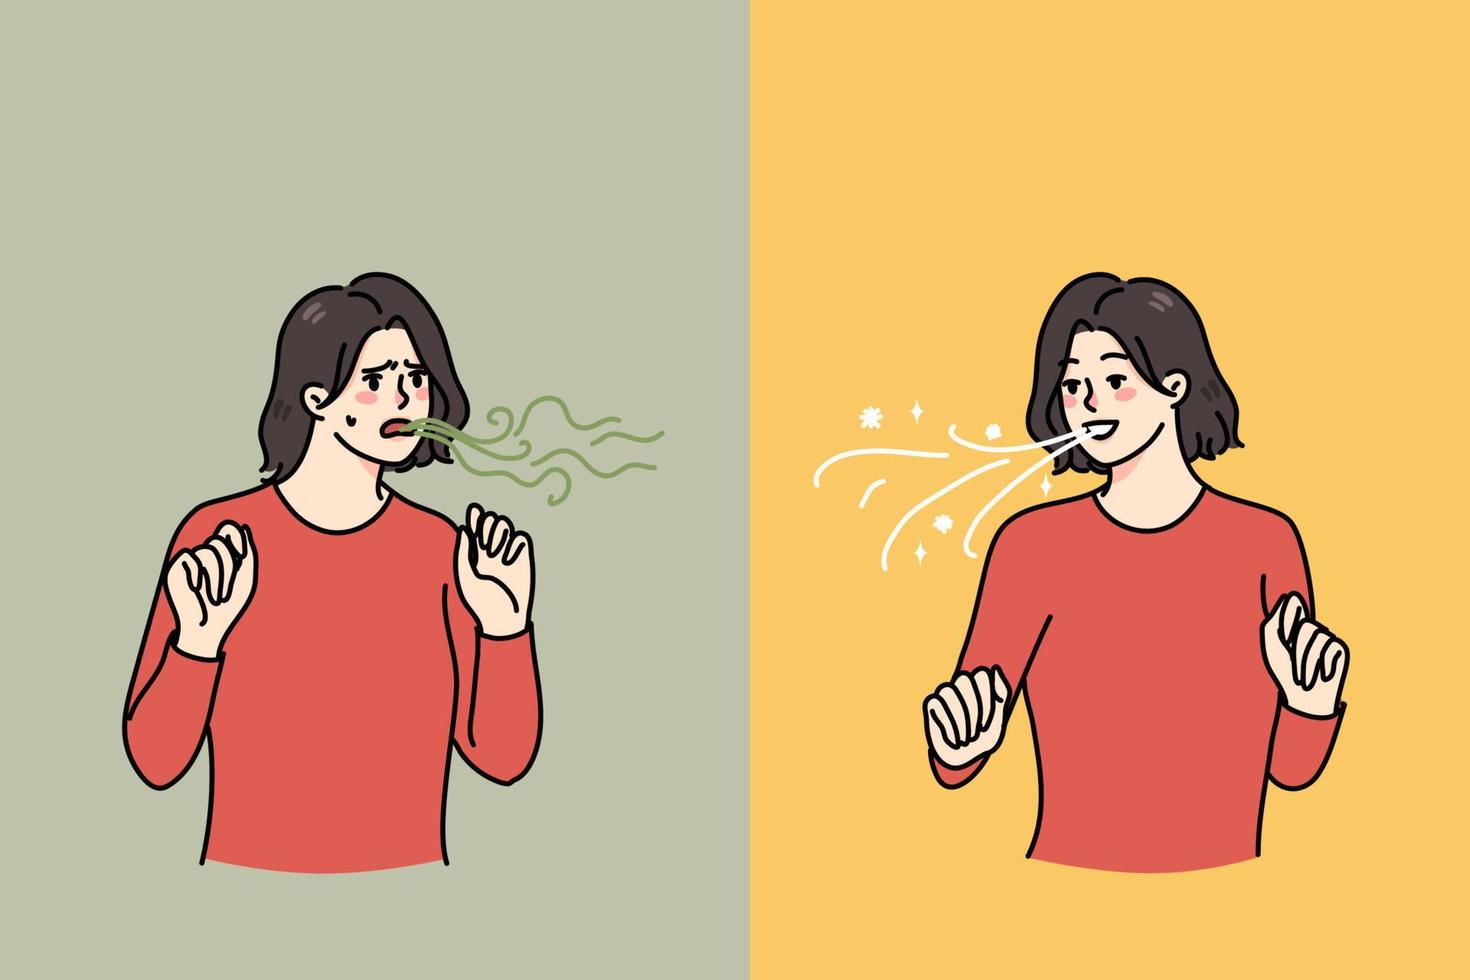 Young woman before and after good oralcare or tooth hygienic routine. Problem of bad breath. Girl clean wash teeth for mouth freshness. Dental hygiene and care. Flat vector illustration.